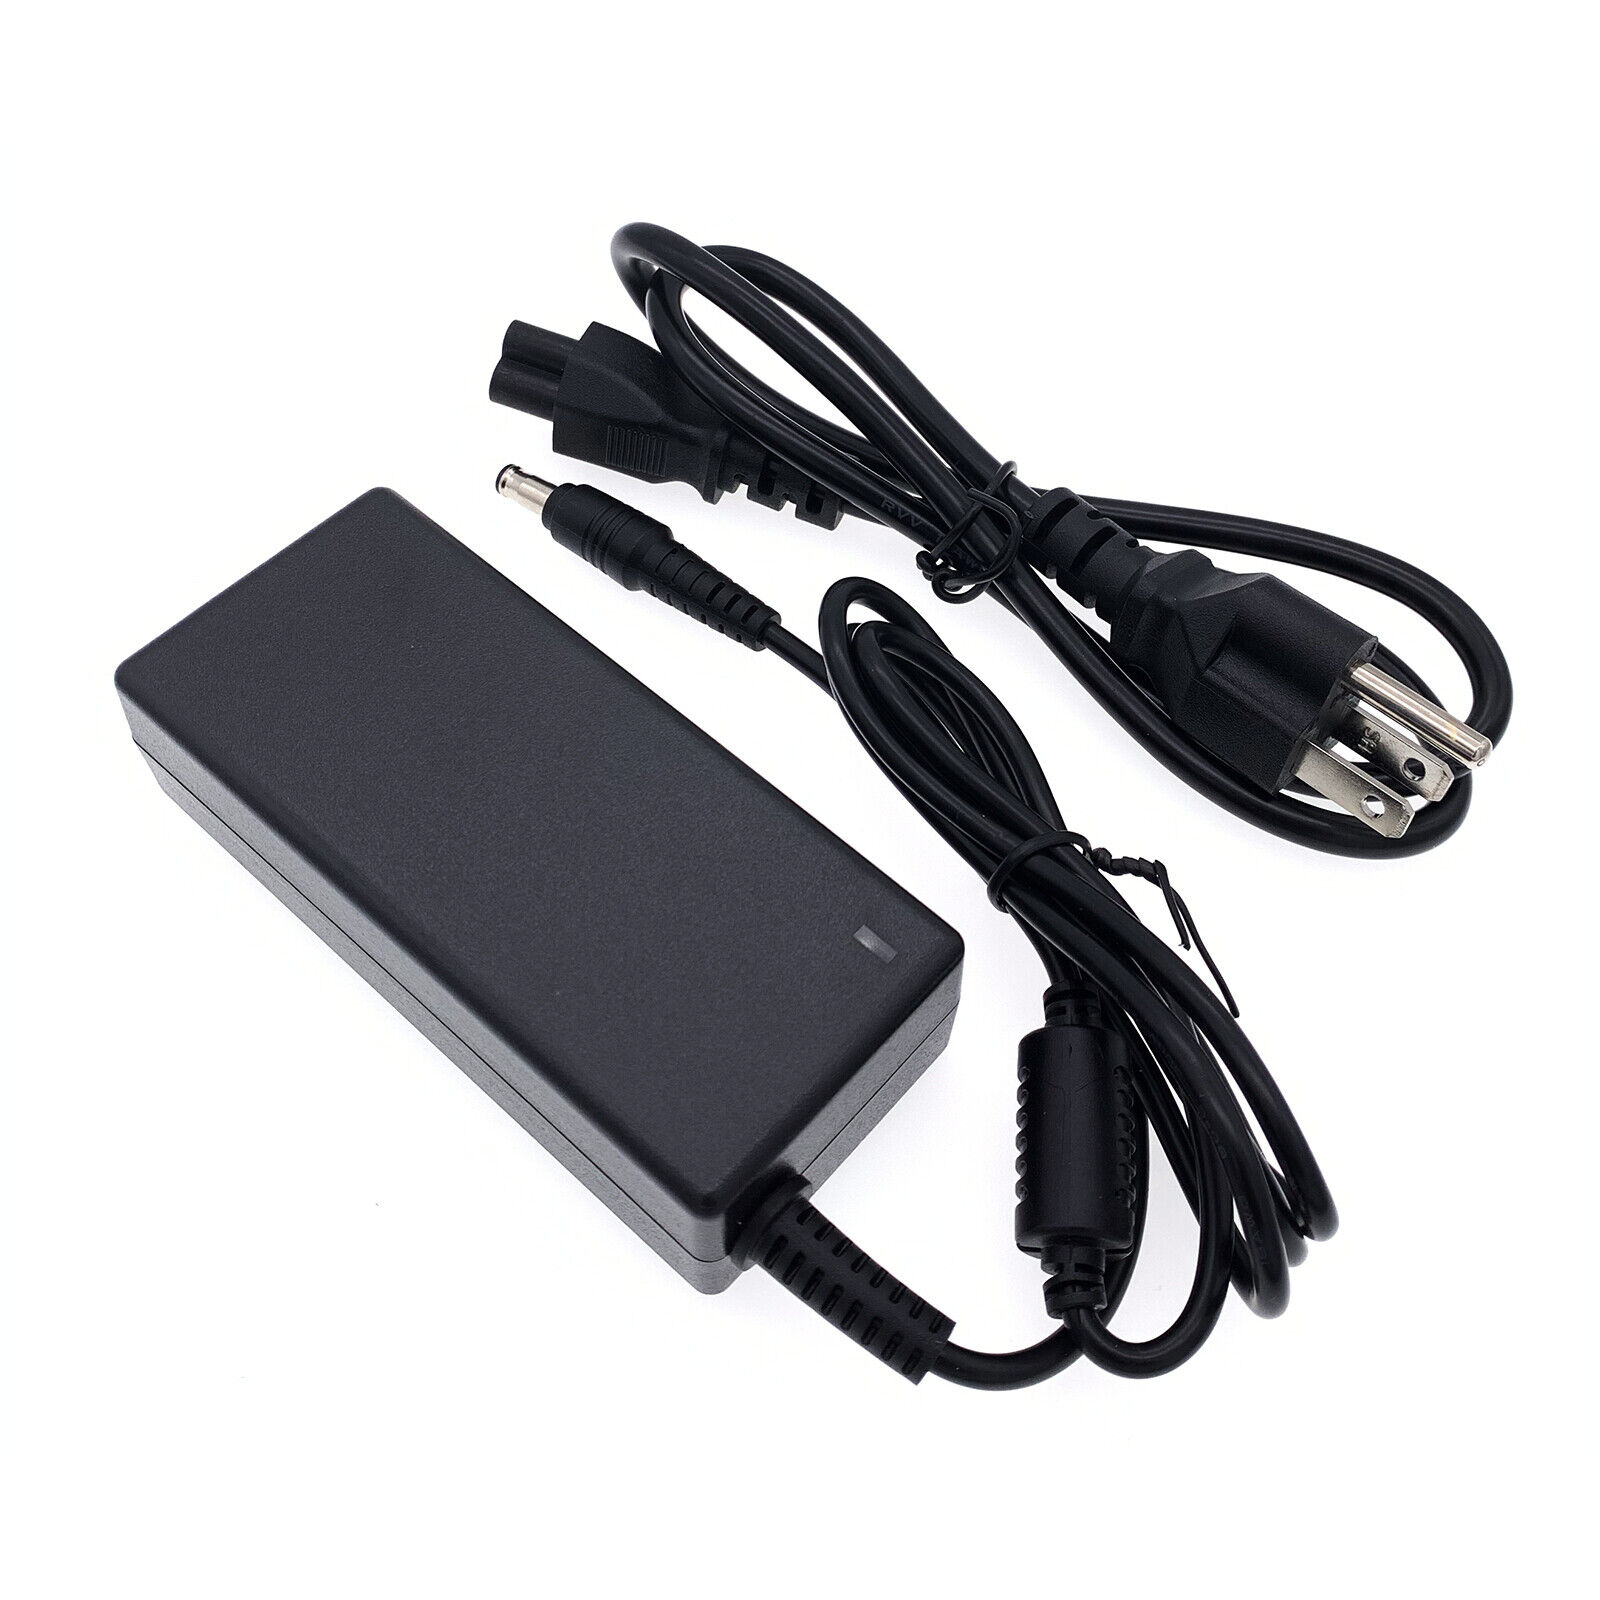 19V 3.15A 60W AC Power Laptop Charger Adapter For Samsung CPA09-004A AD-6019R